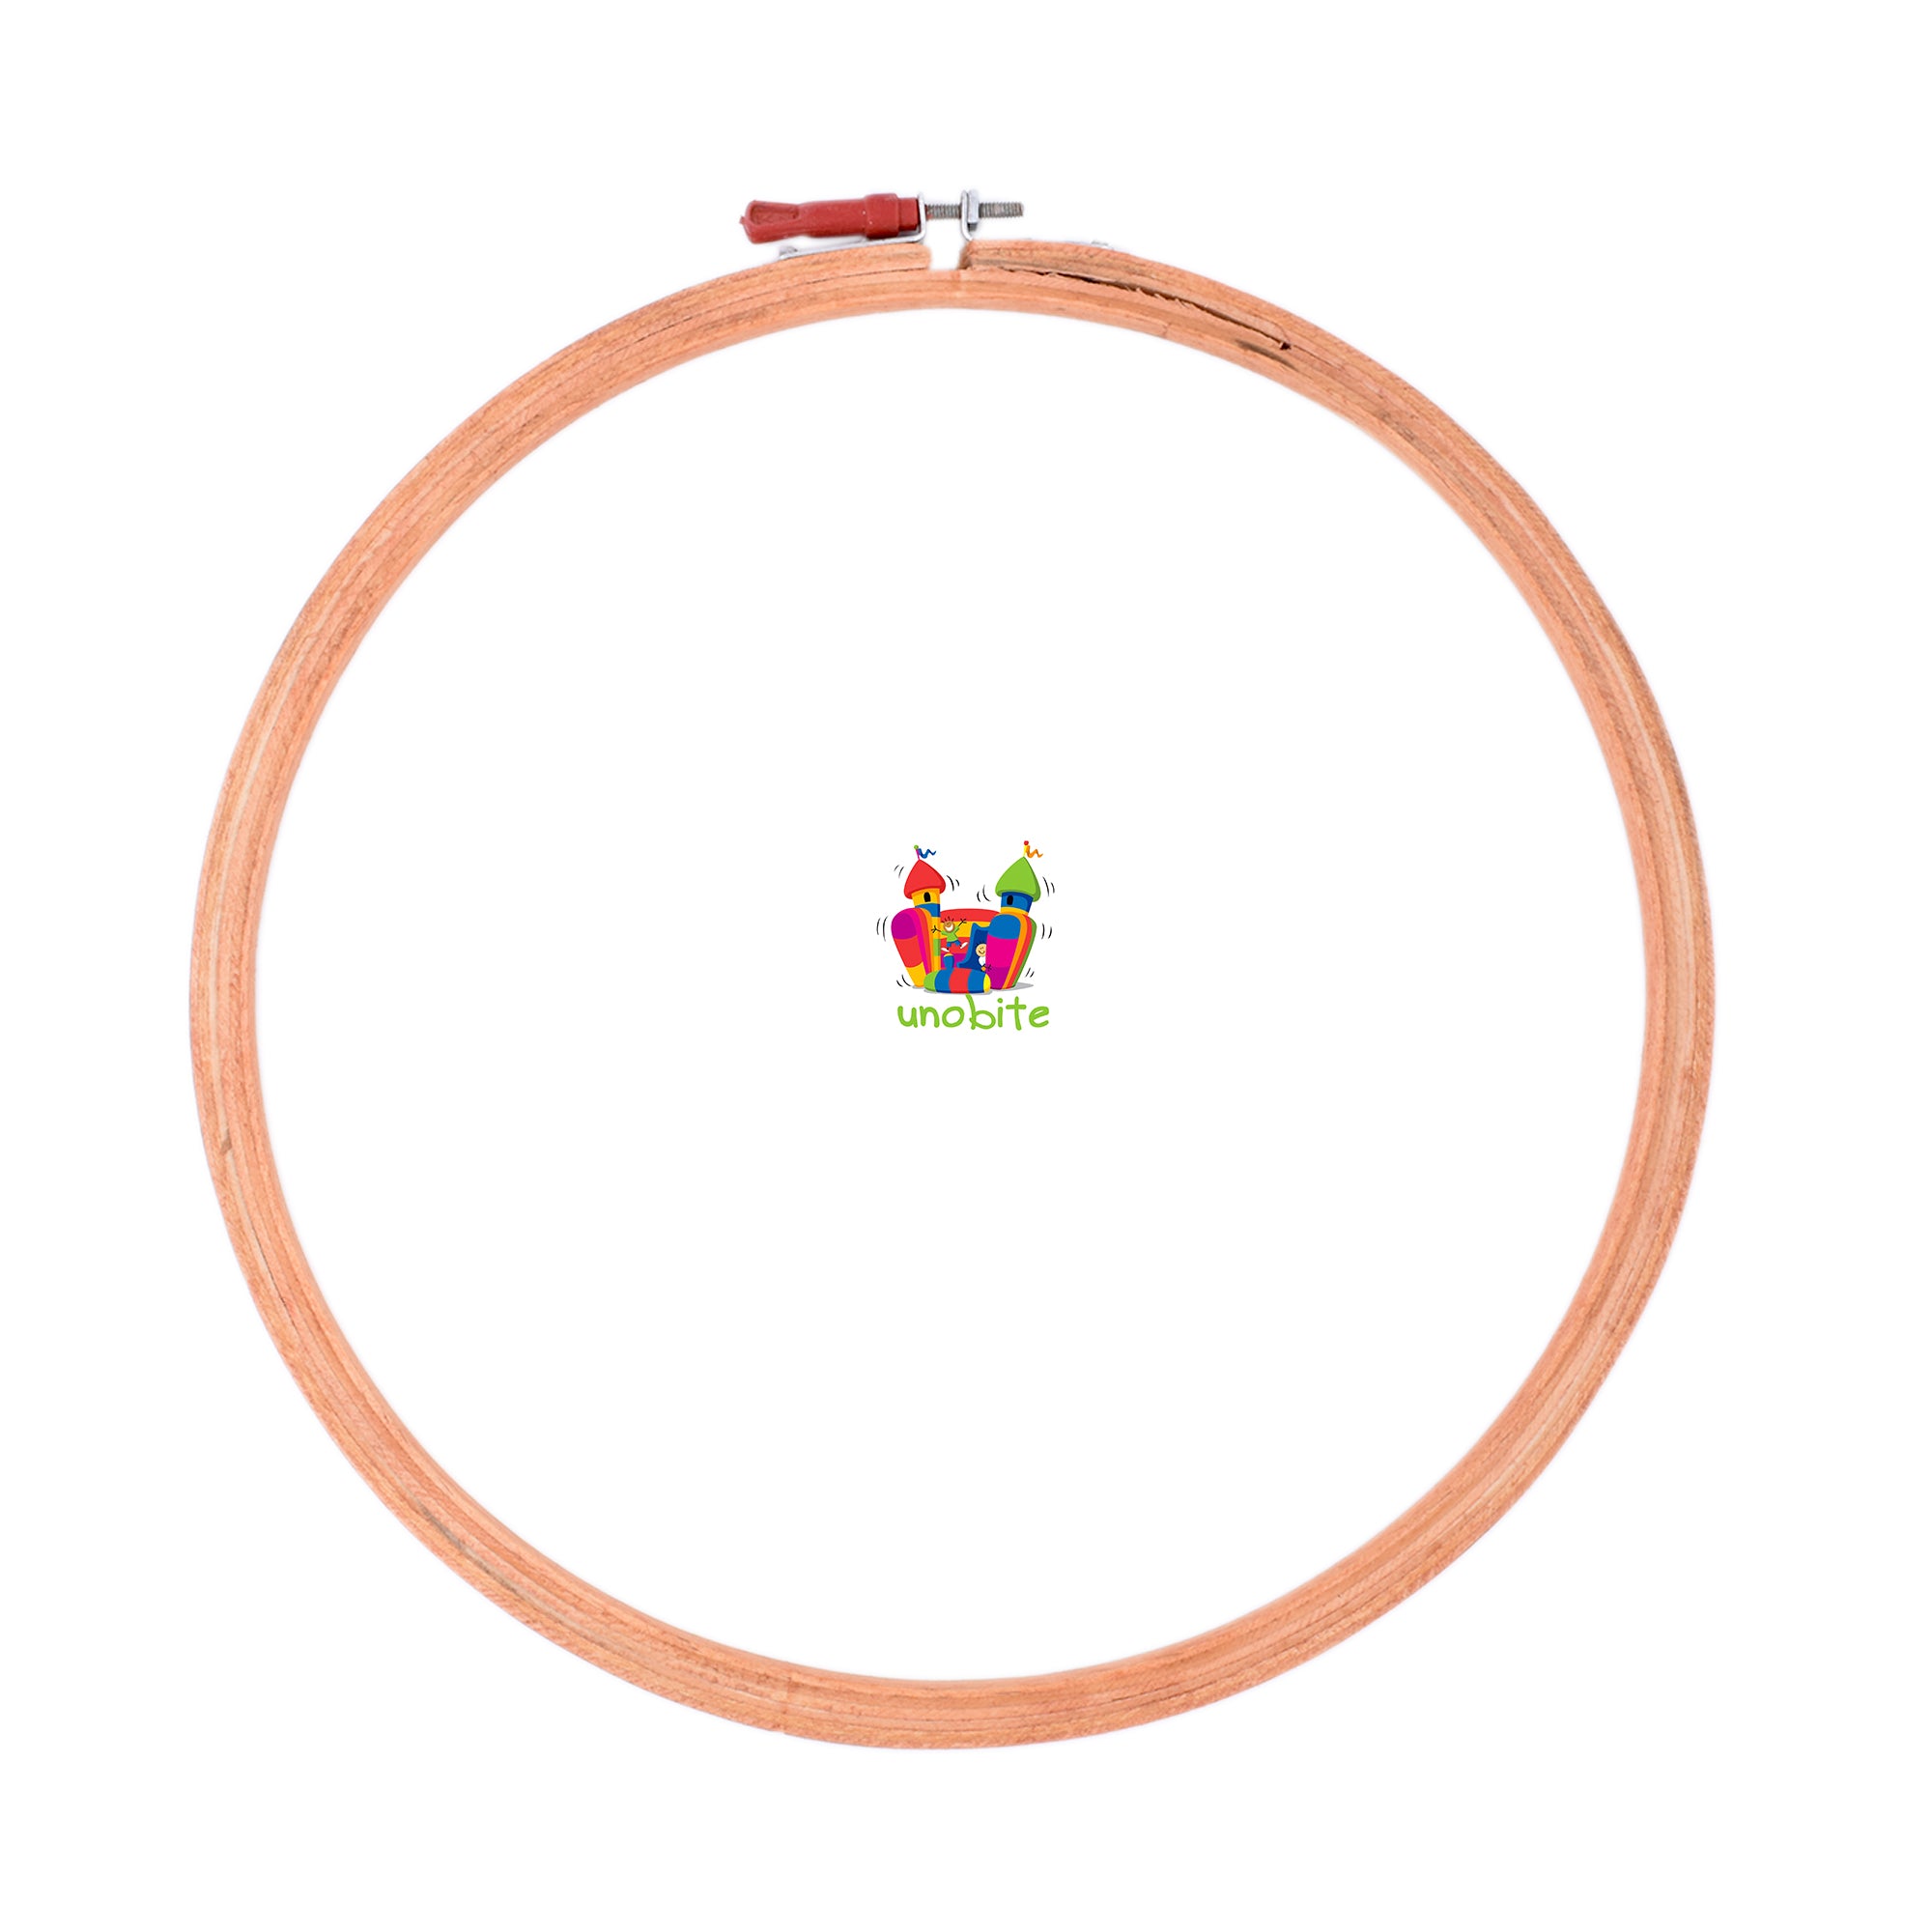 M Fabrics Wooden Embroidery Hoop Ring Frame (Multiple Sizes)- | M Fabrics M  Fabrics embroidery collection comprises of embroidery frames (in various  sizes), cross stitch fabric, embroidery tools, embroidery wool. This  embroidery